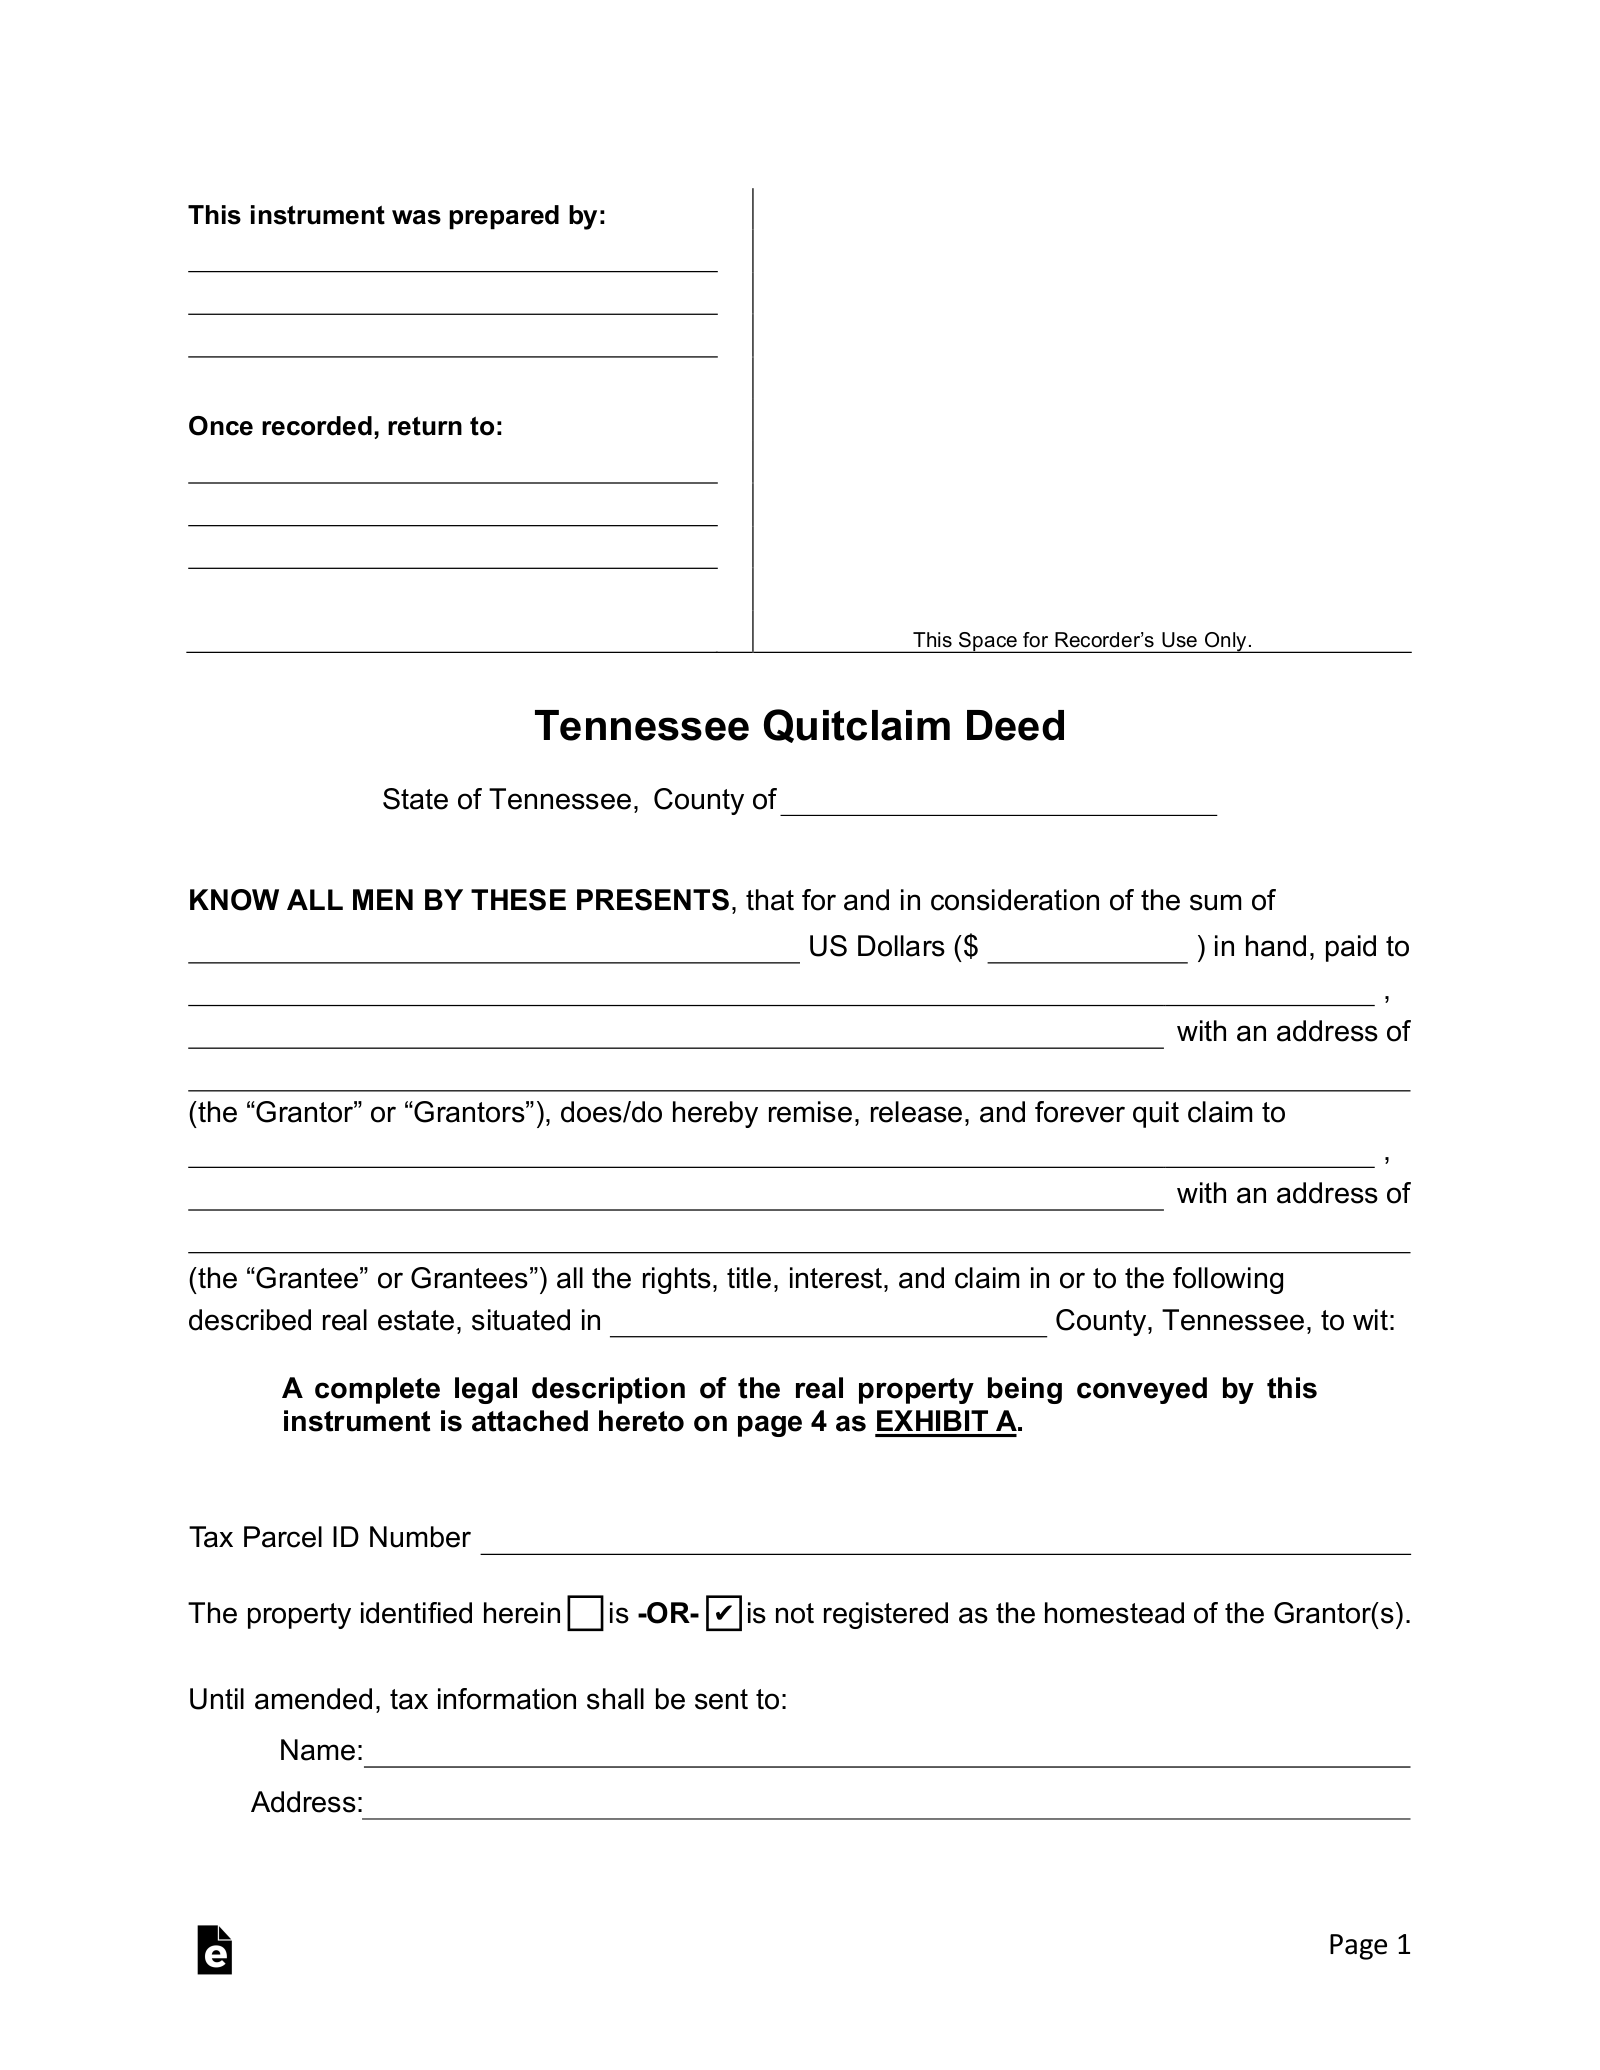 Tennessee Quit Claim Deed